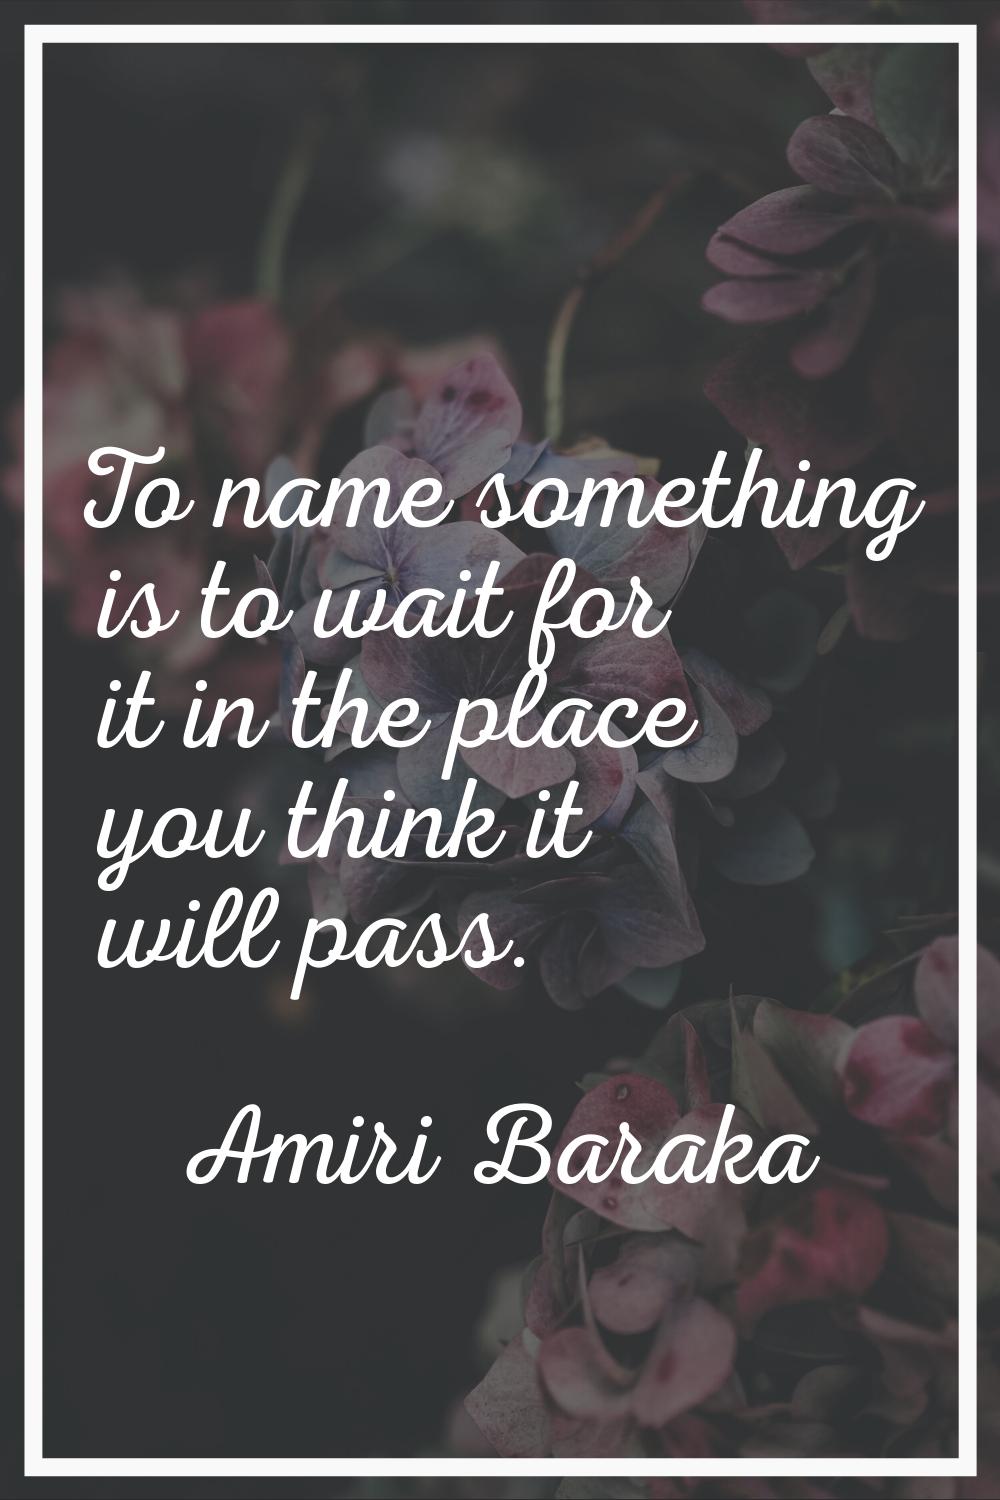 To name something is to wait for it in the place you think it will pass.